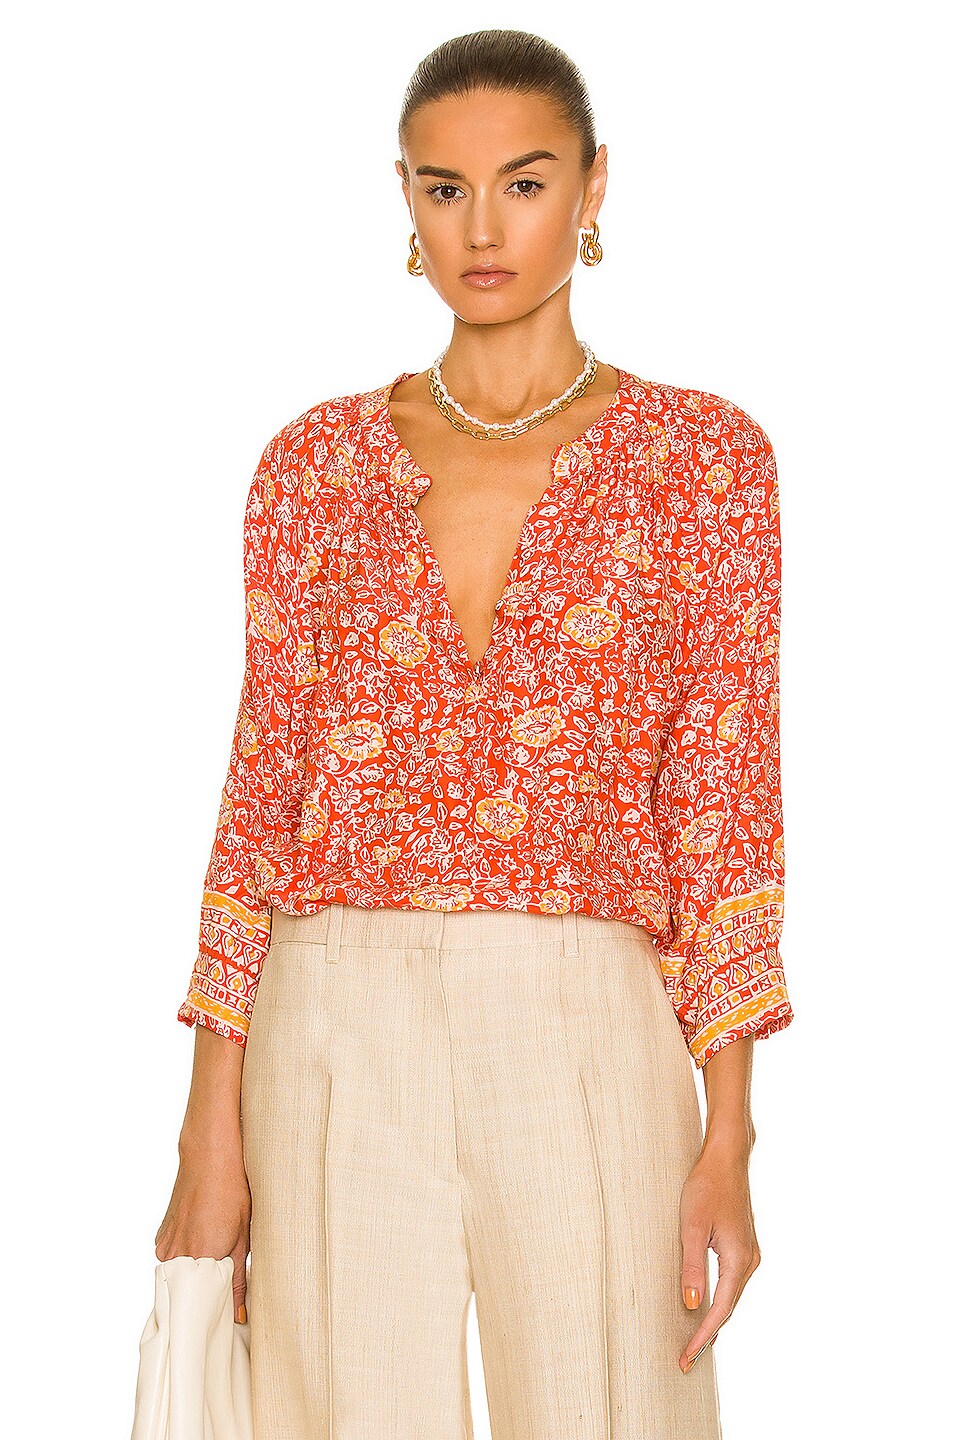 Image 1 of Natalie Martin Remy Top in Floral Print Tuscany Sun